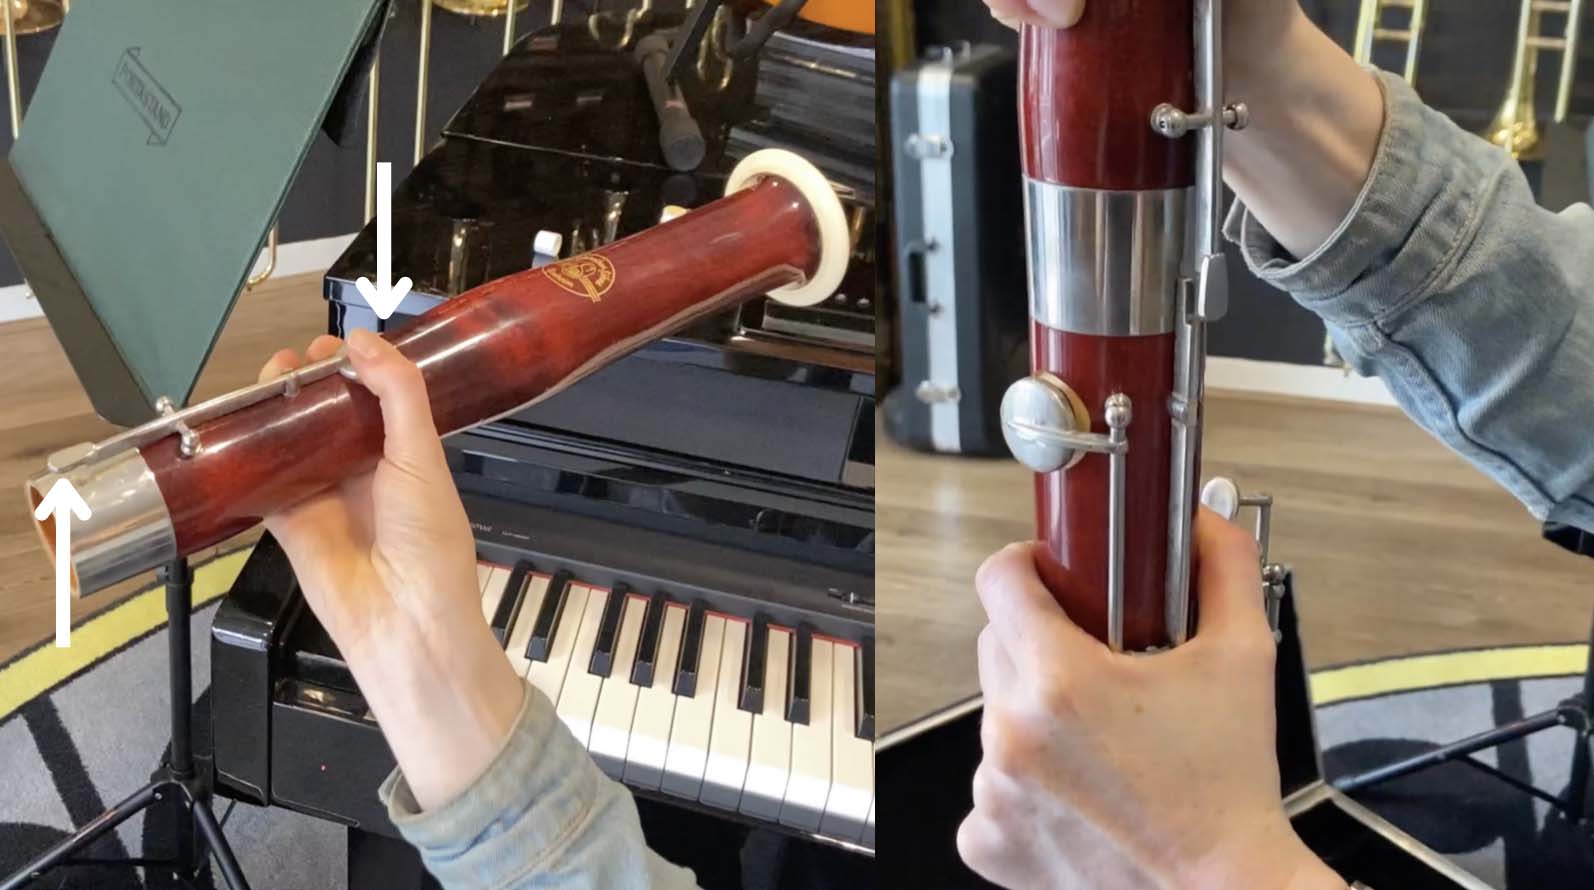 Two images side by side. On the left side, an arrow points down onto the key on the bell. A finger is pushing it down, causing it to raise where the joint connects into the long joint. On the right side, the key on the bell is aligned with the key on the long joint. 